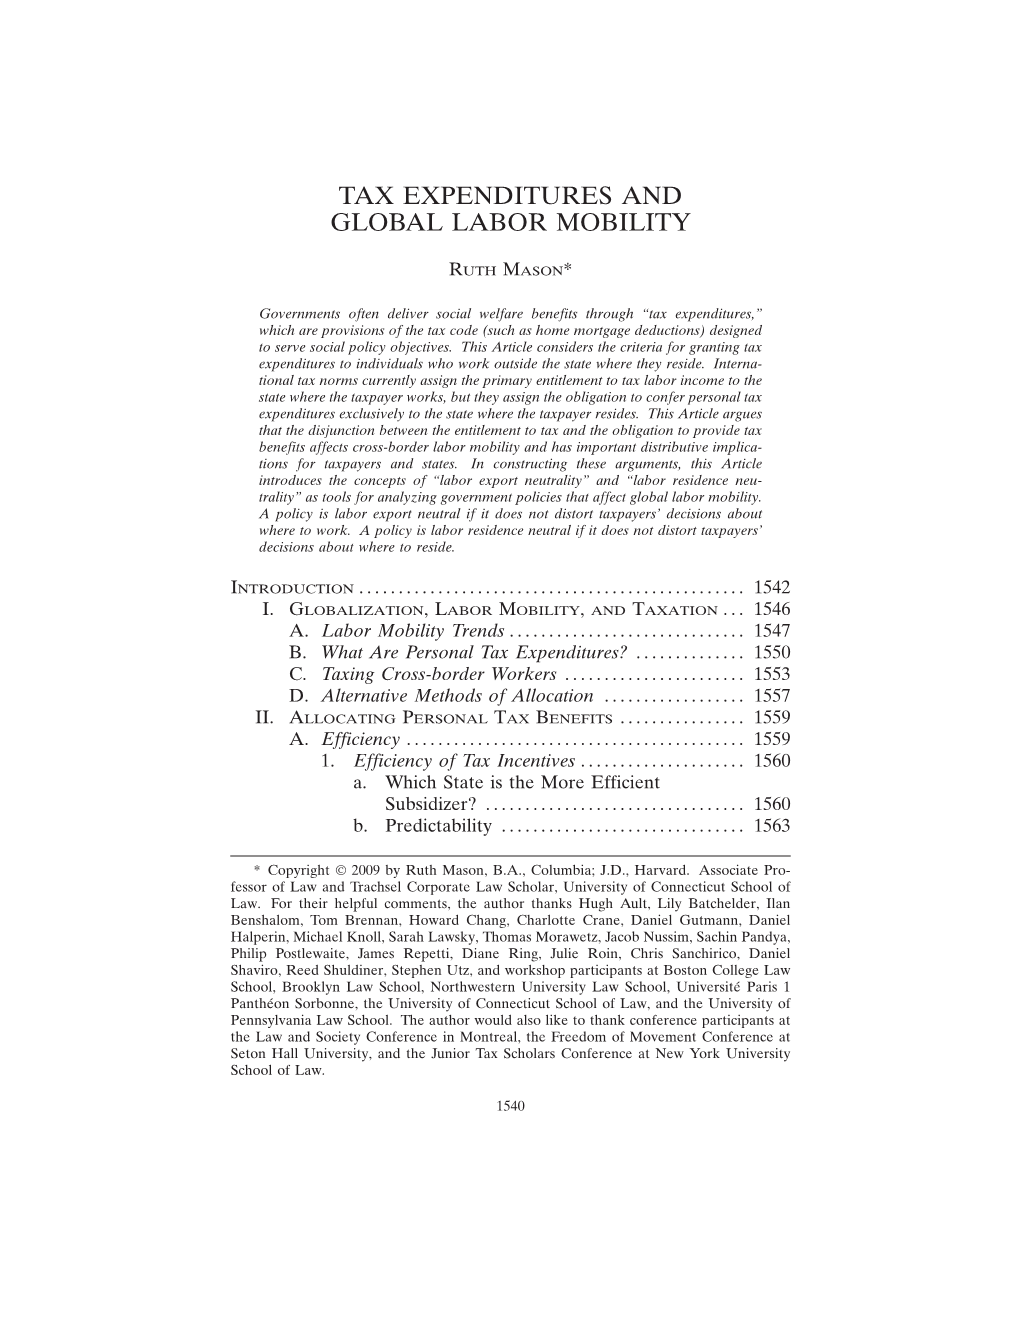 Tax Expenditures and Global Labor Mobility